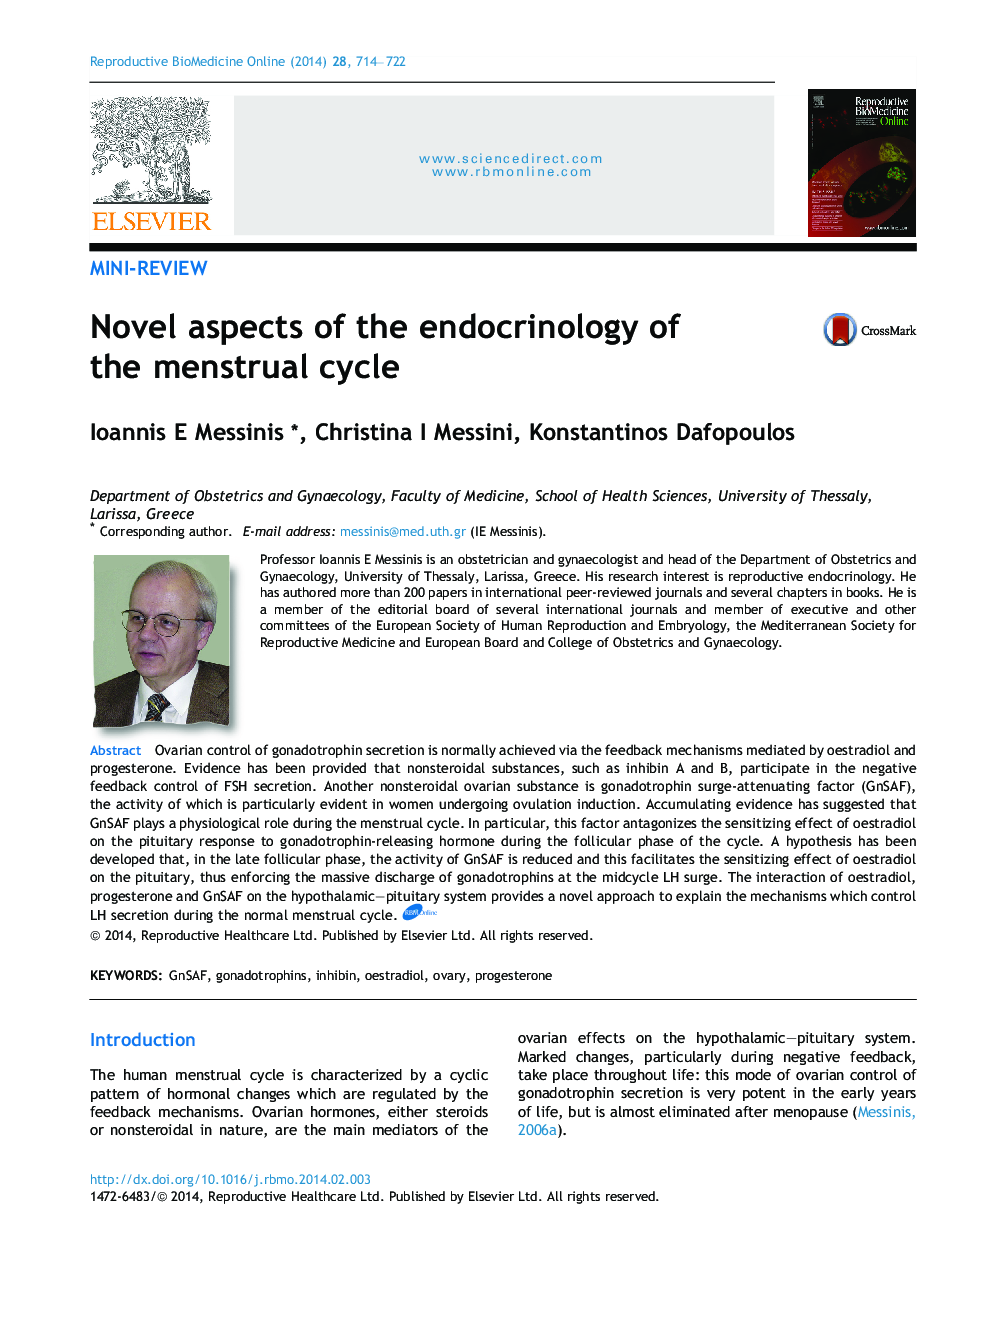 Novel aspects of the endocrinology of the menstrual cycle 